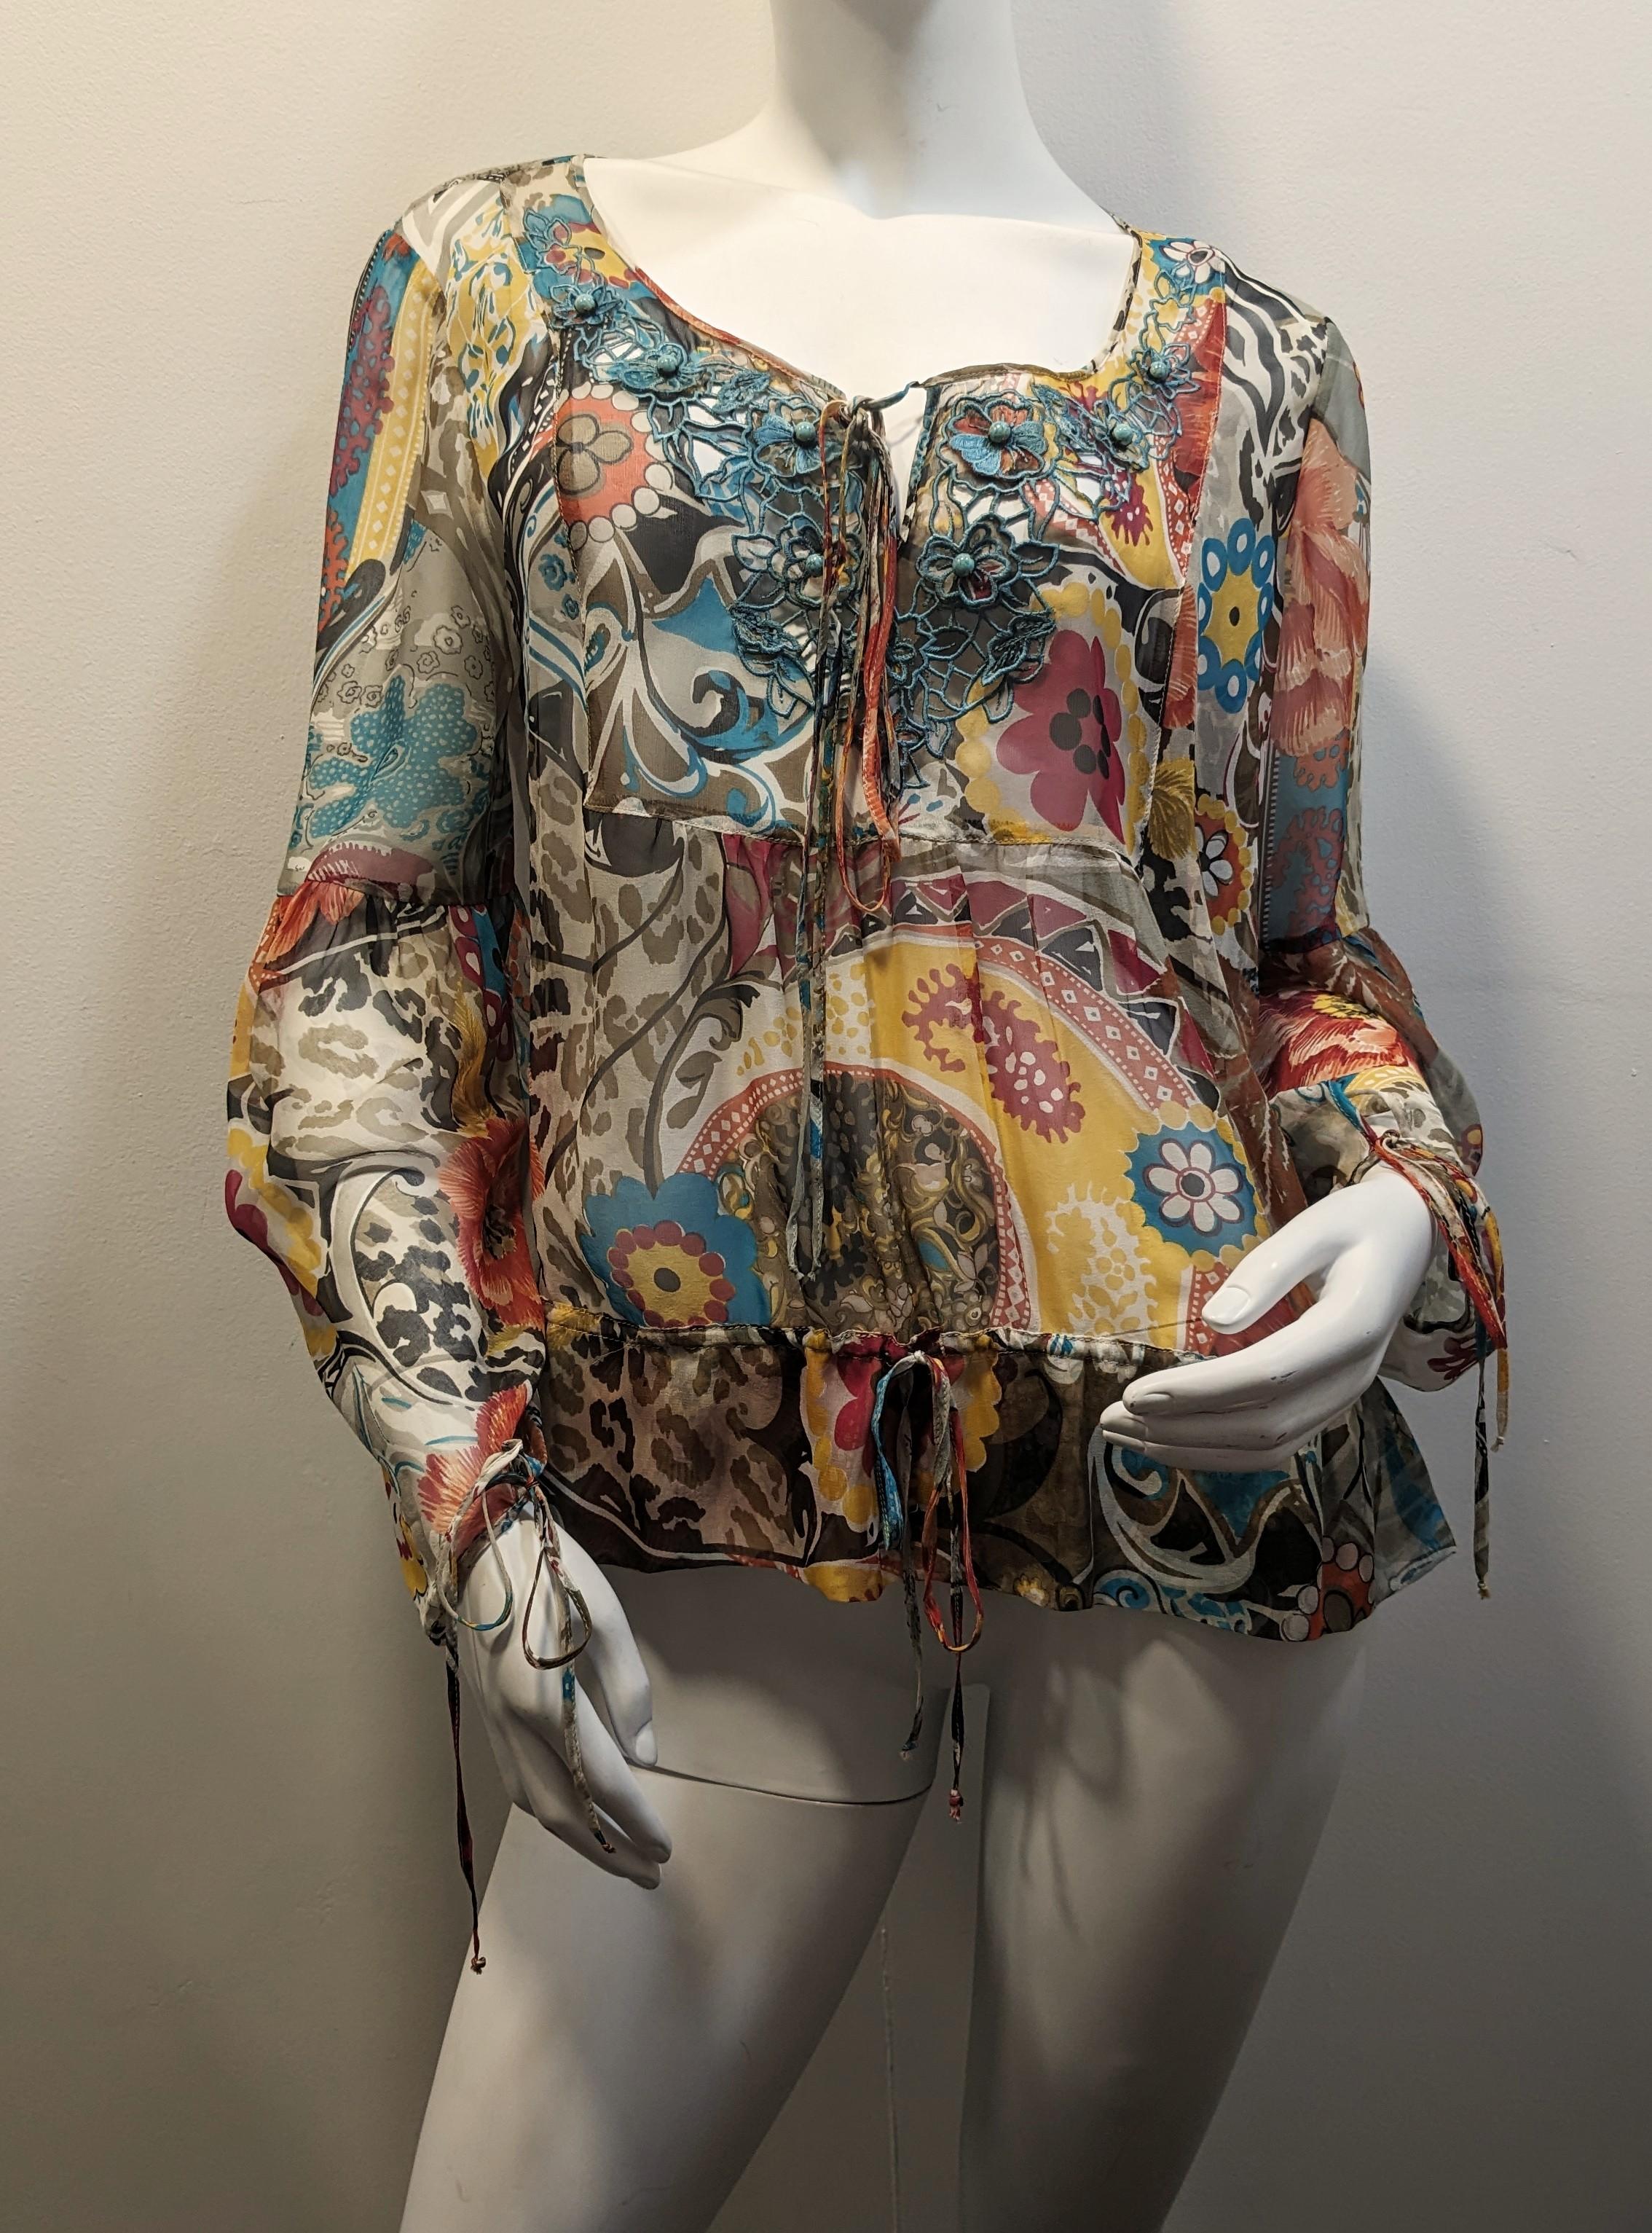 Blouse Flowers Blumarine
Romantic blouse with floral print. The button placket is decorated with embroidered flowers Tie closure on the front. Tie waist and sleeves
Origin: Milan, Italy
Fashion designer:  Blumarine
Material  Silk



The Italian firm